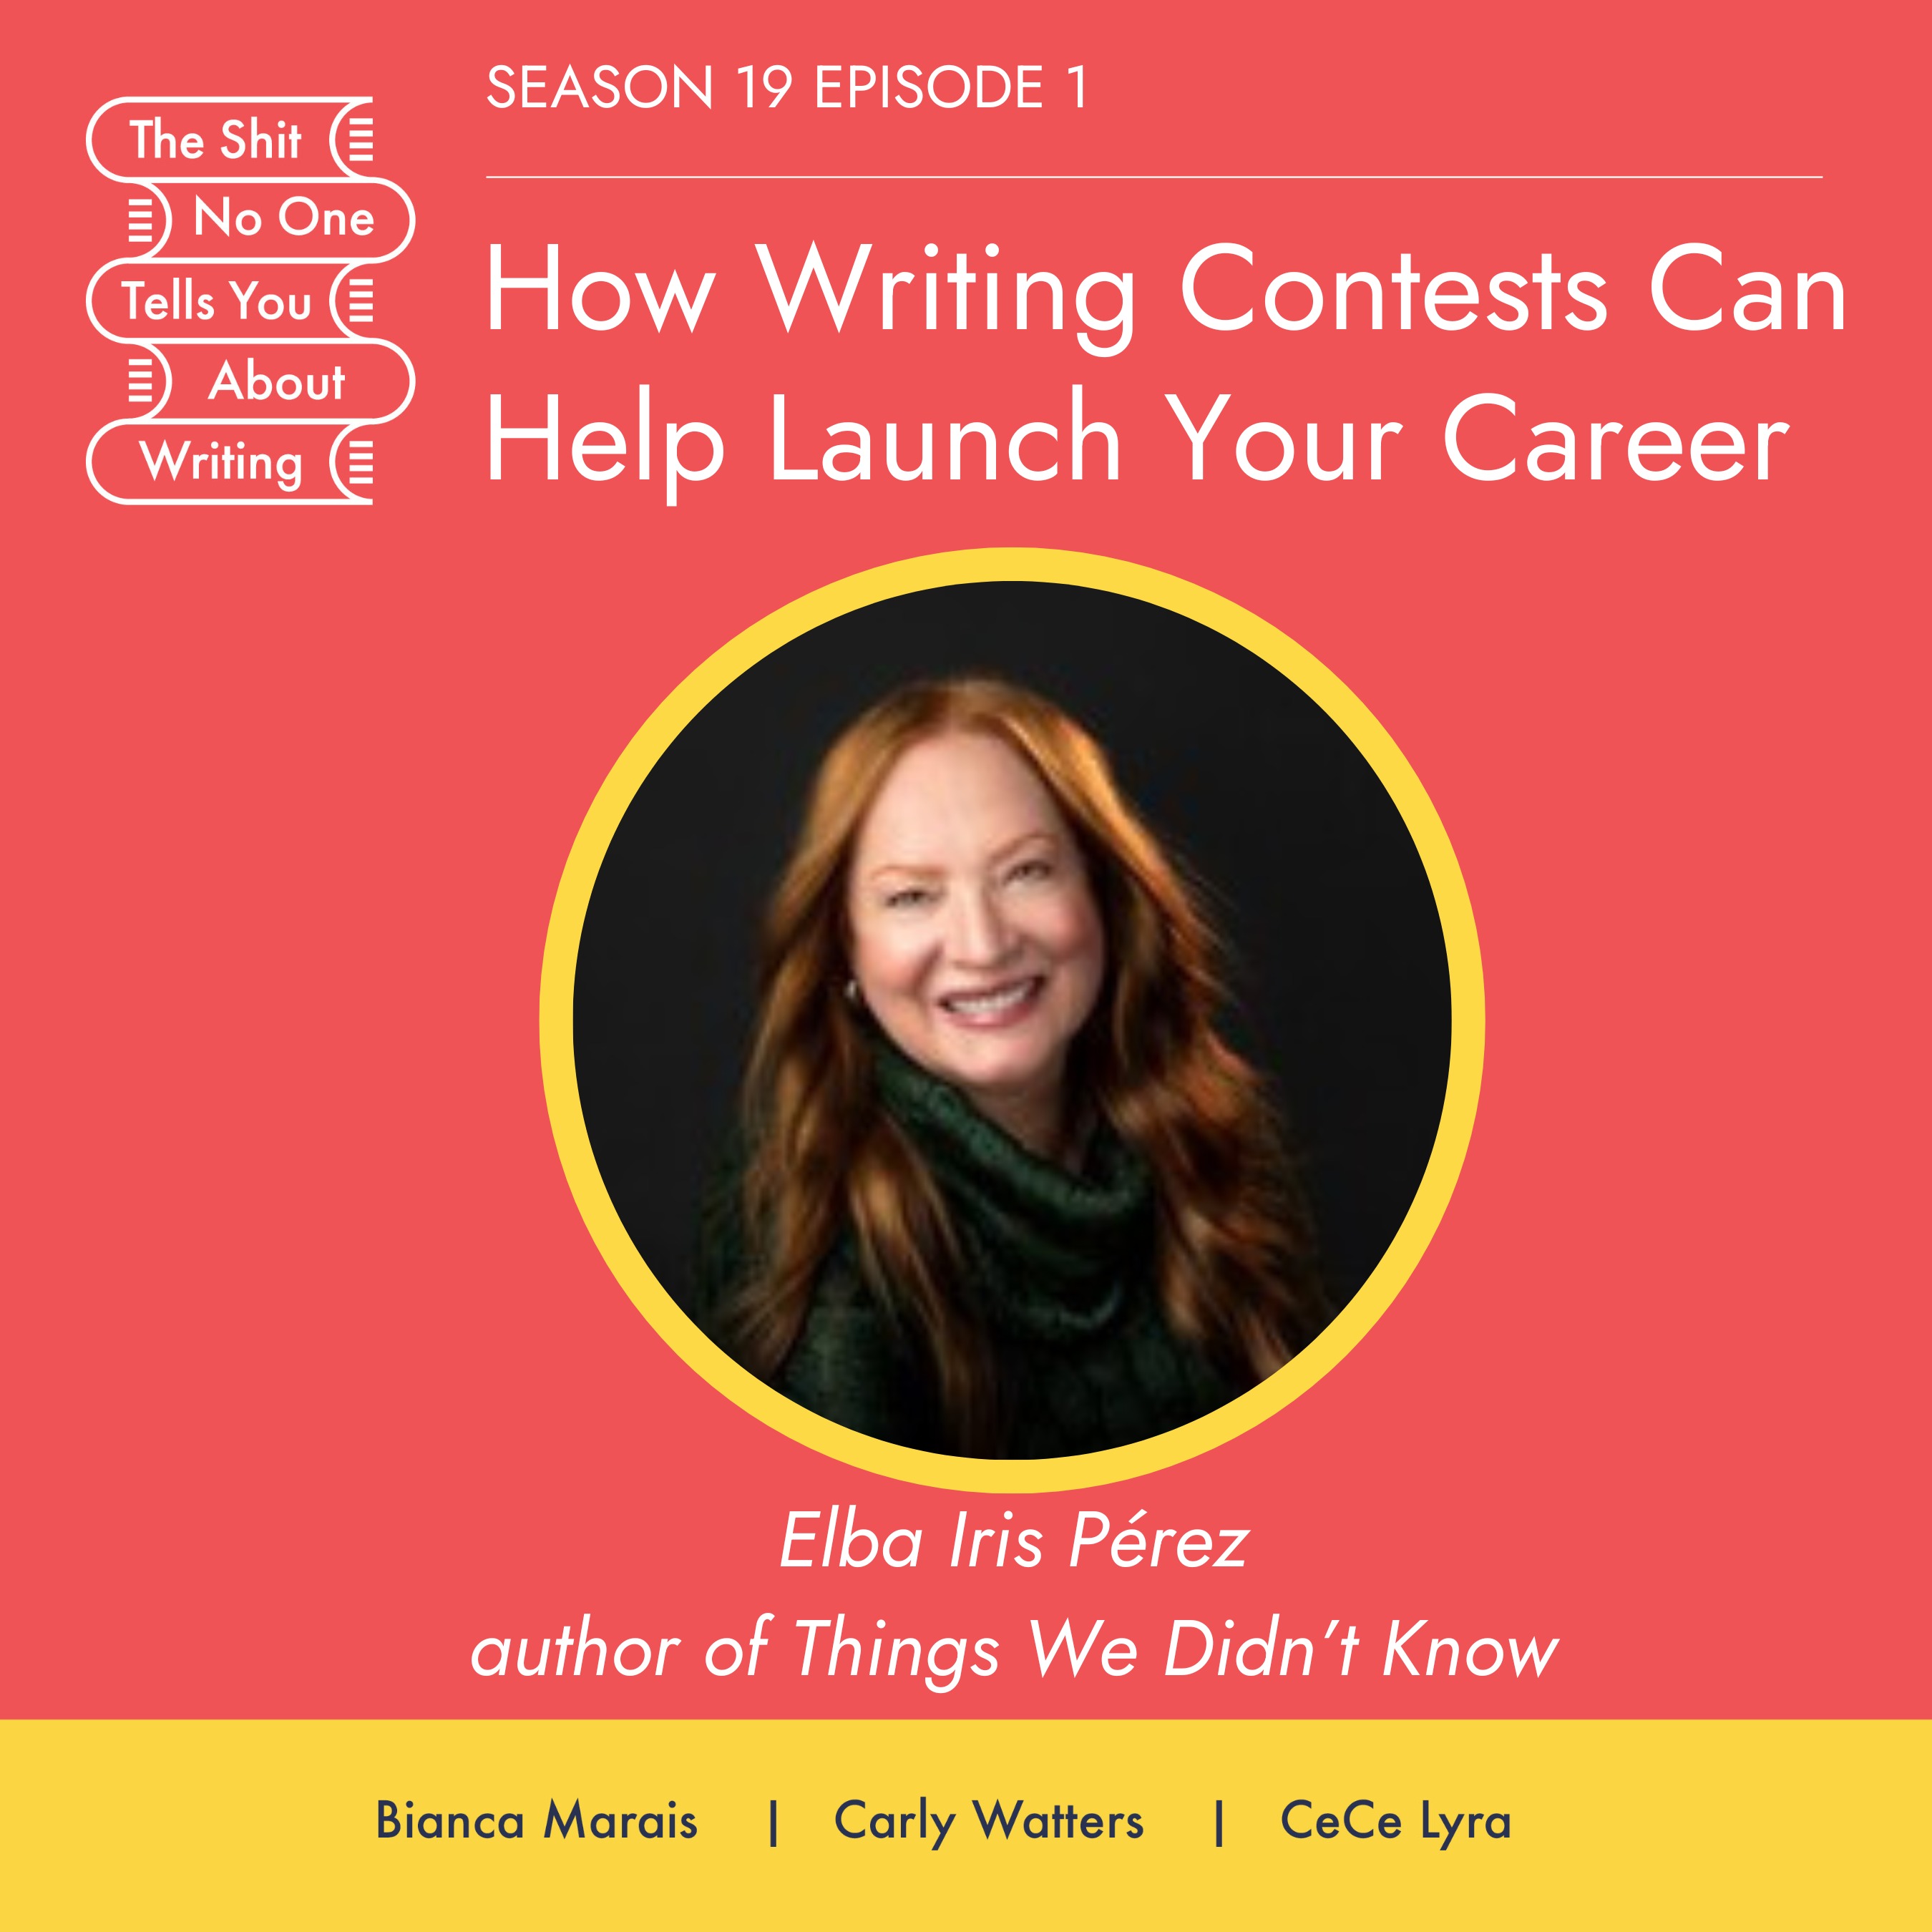 How Writing Contests Can Help Launch Your Career